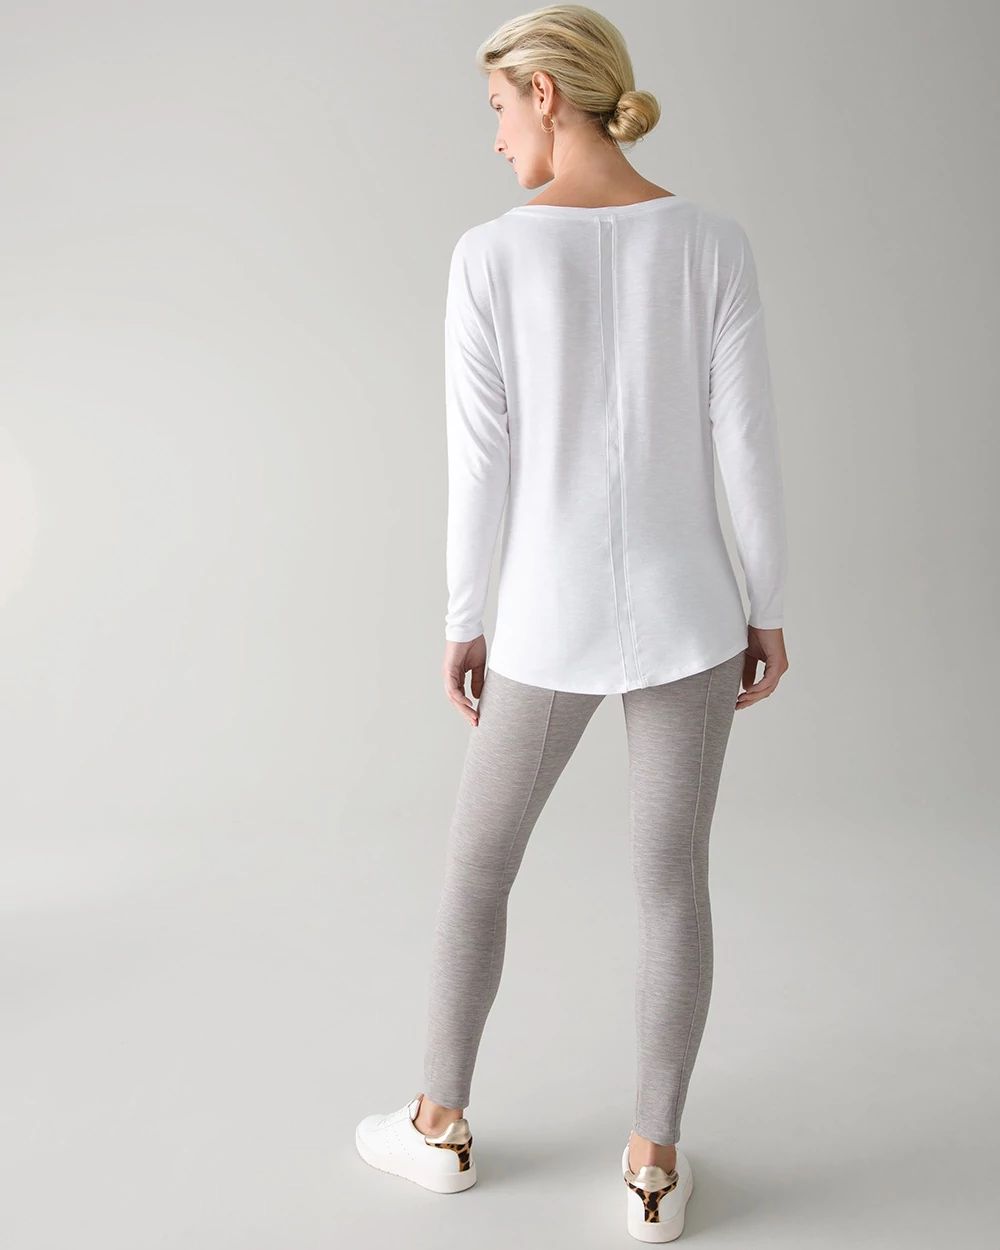 WHBM WKND Relaxed Knit Legging click to view larger image.